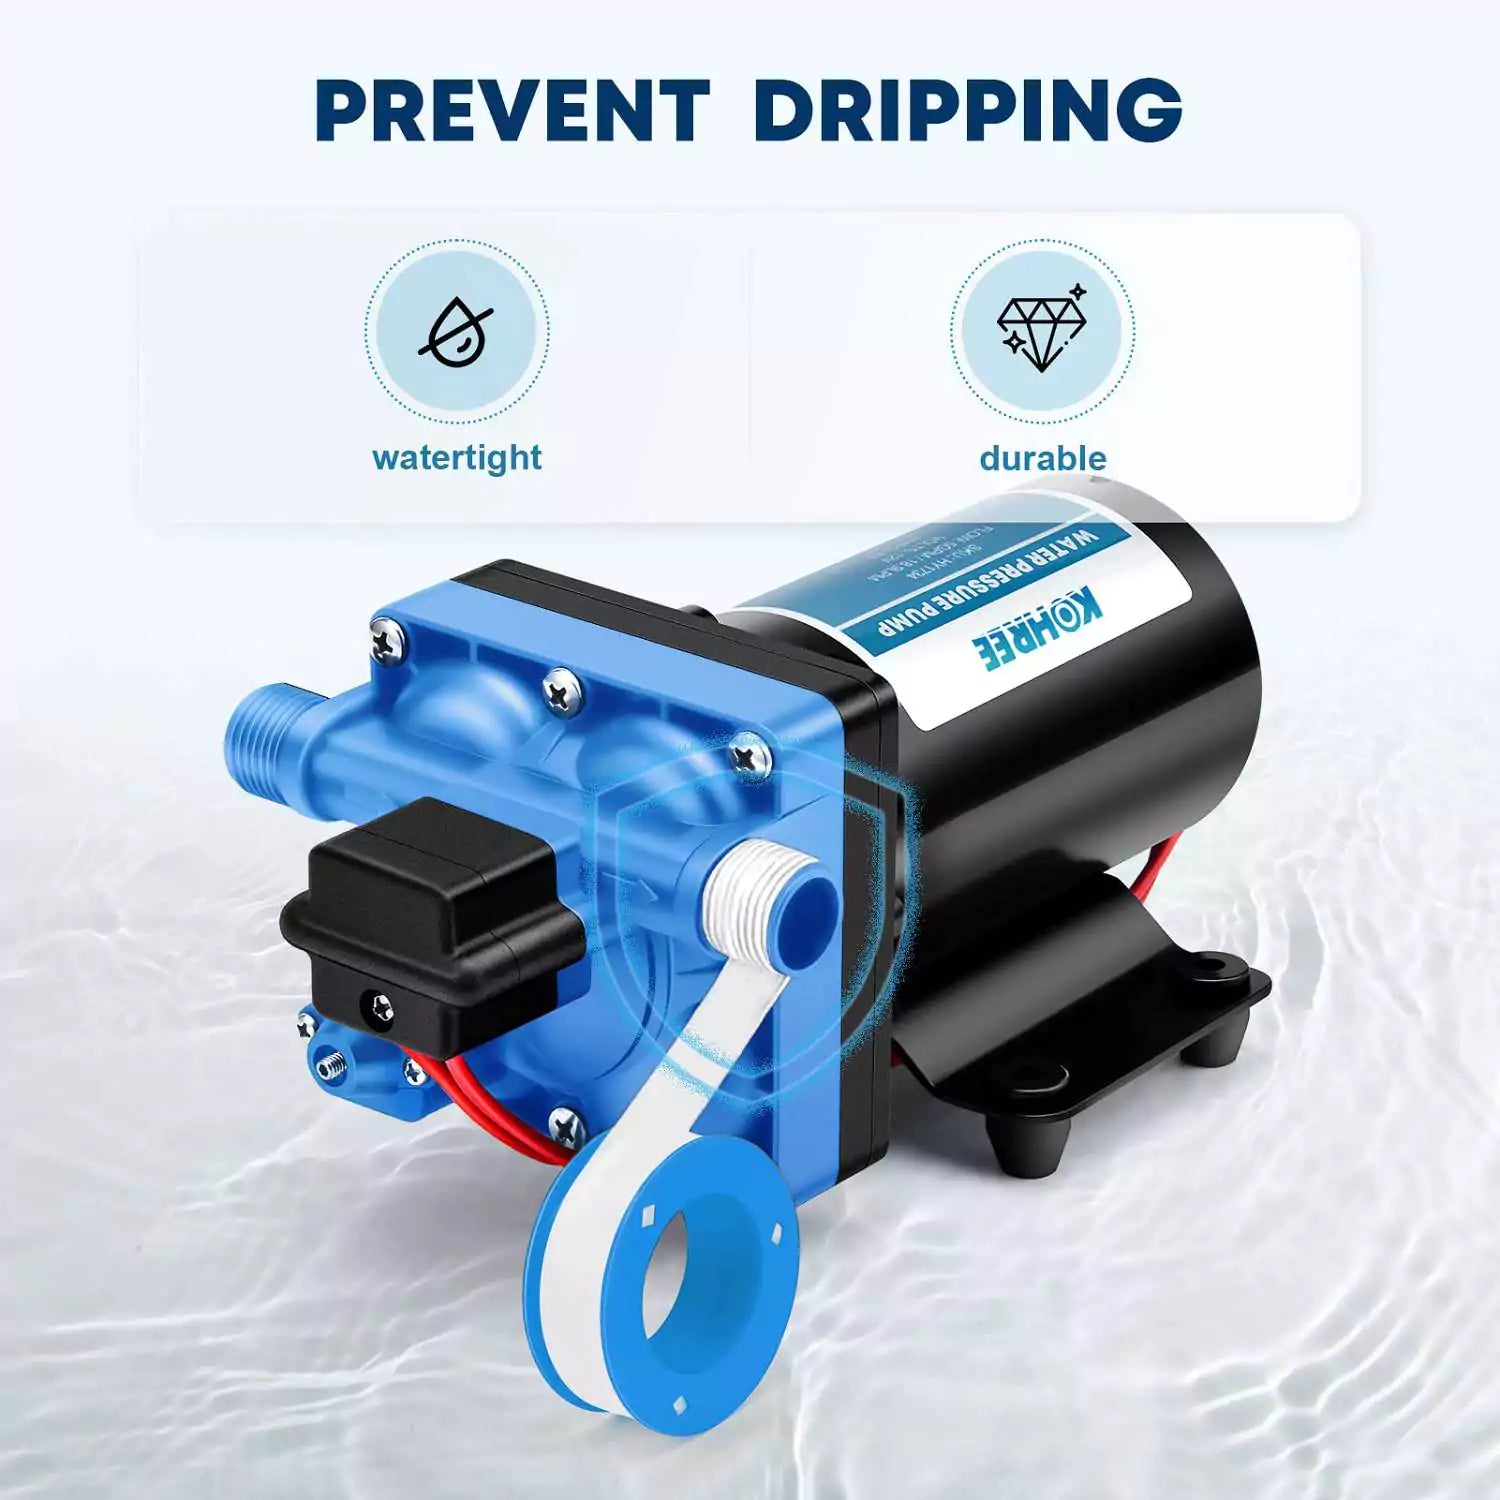 Prevent deipping design of water pump for an RV 3.5 gpm